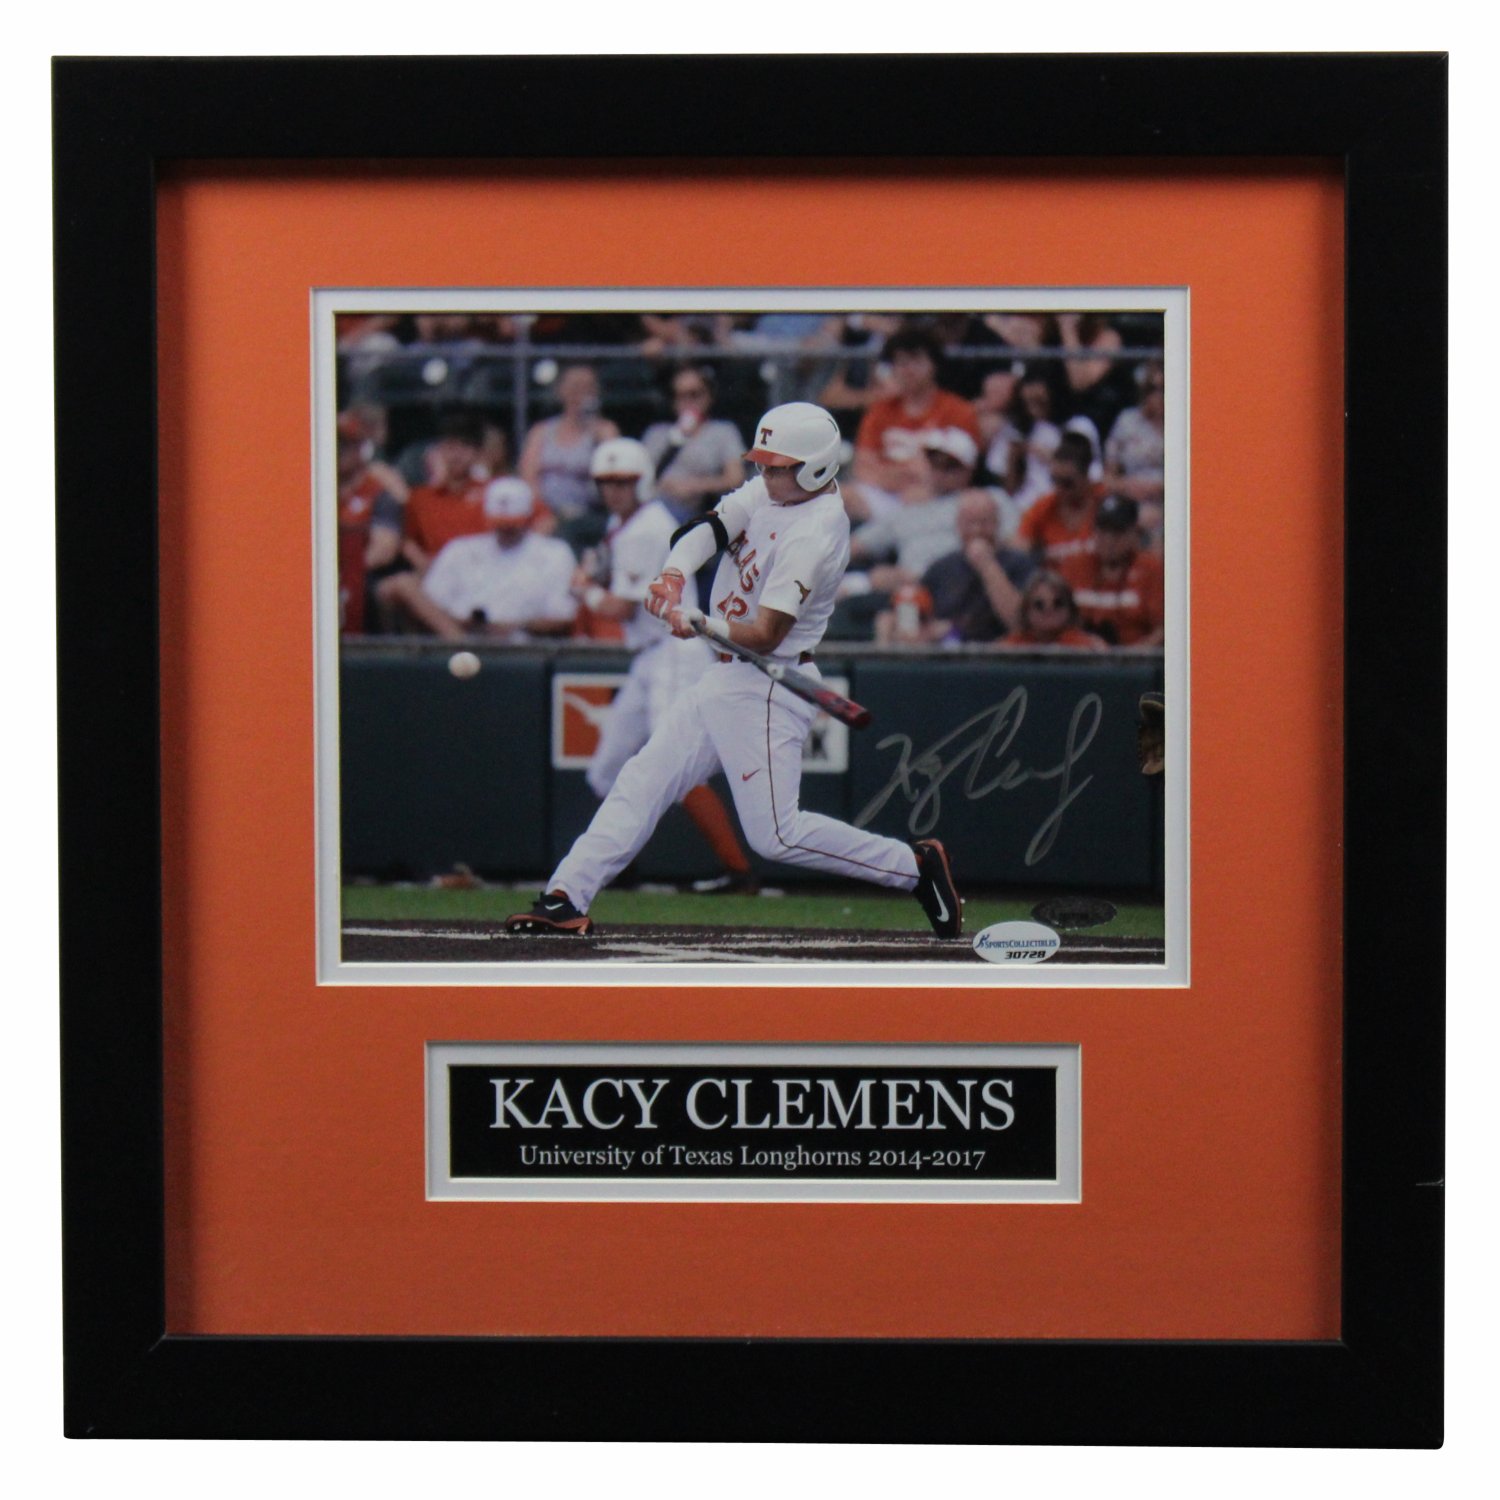 Kacy Clemens Autographed Signed Texas Longhorns Framed Home Run in White  Jersey 8x10 Photo With Name Plate - Certified Authentic